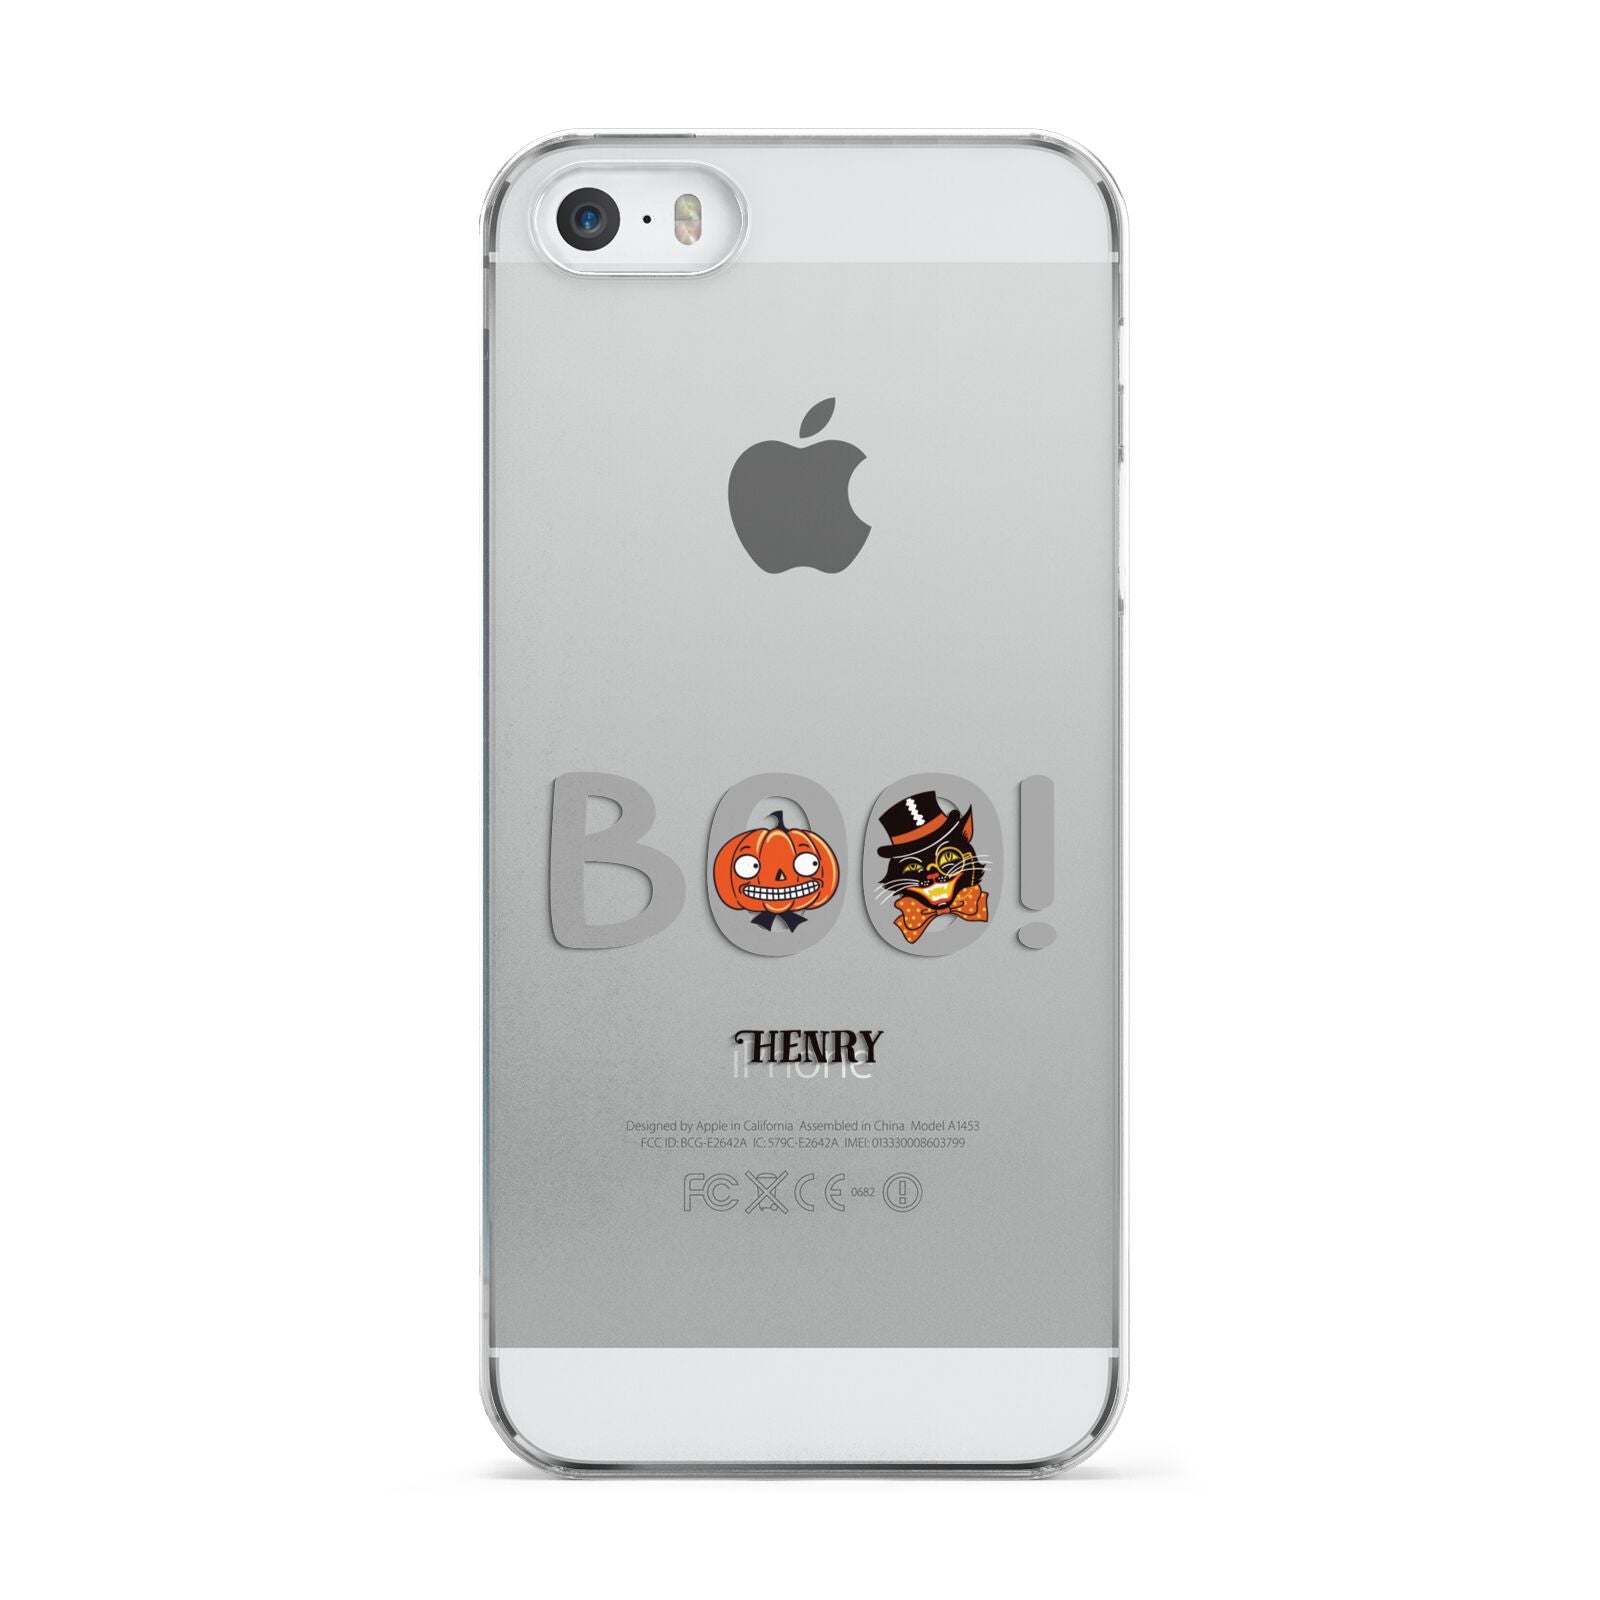 Boo Personalised Apple iPhone 5 Case